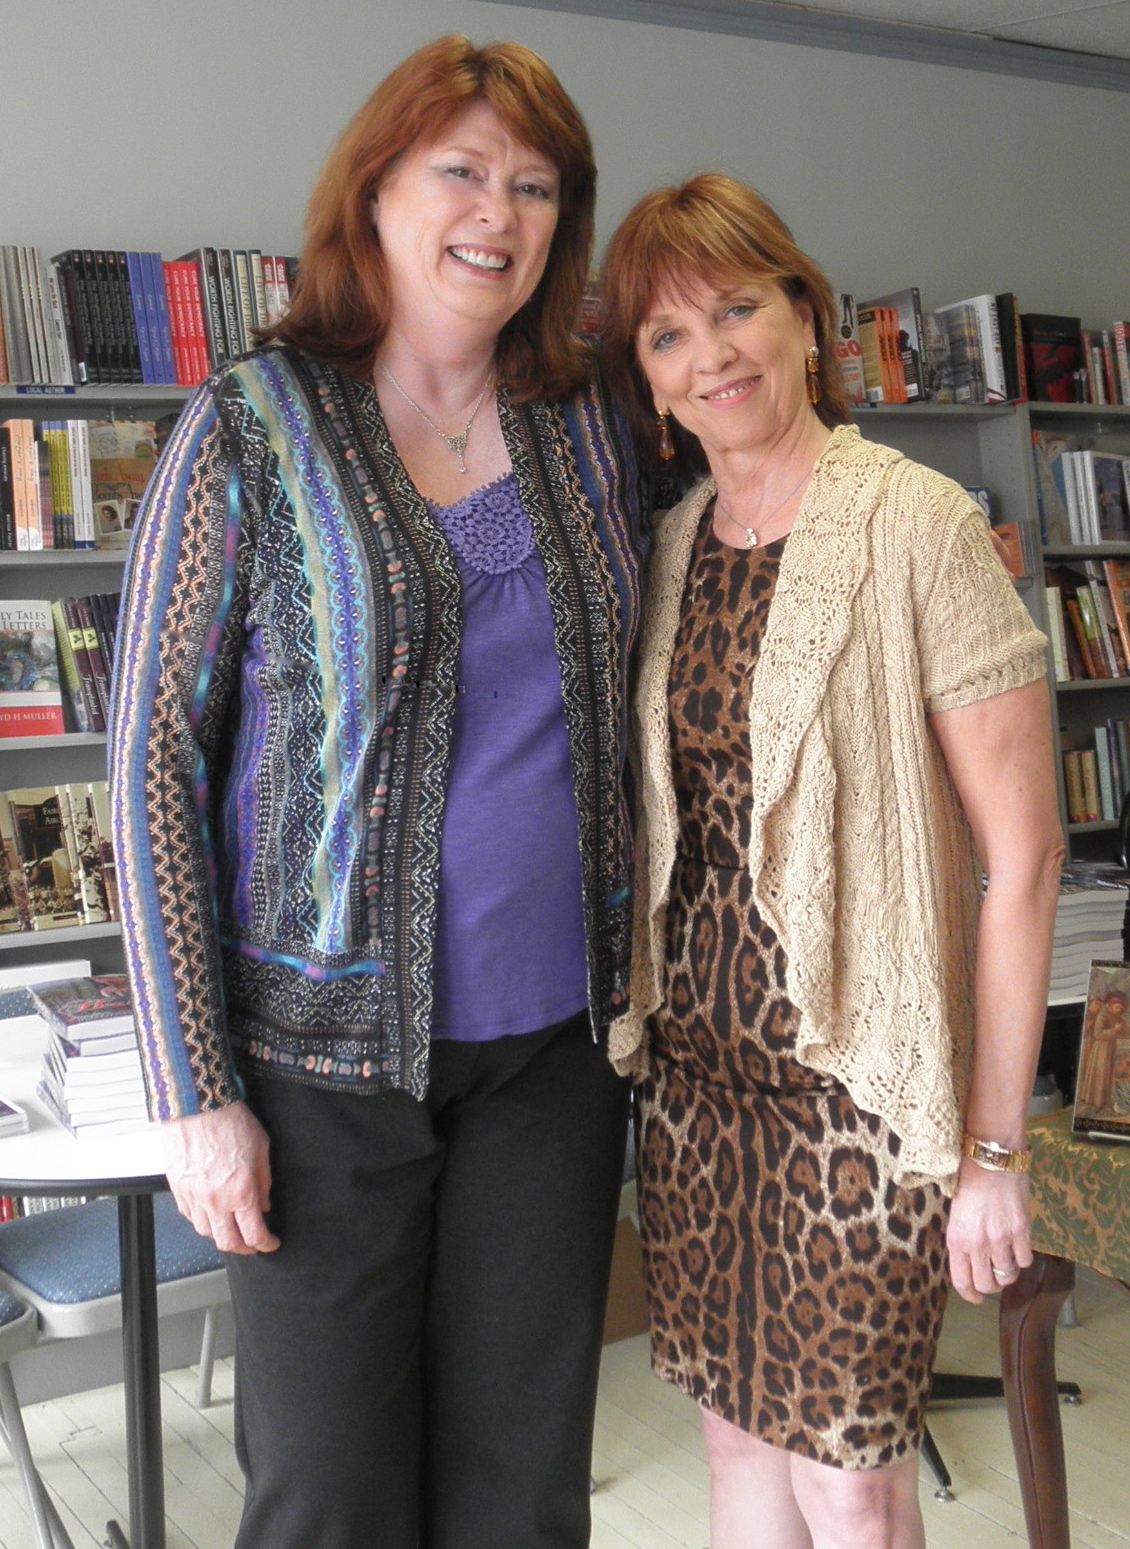 The amazing Nora Roberts (and me)